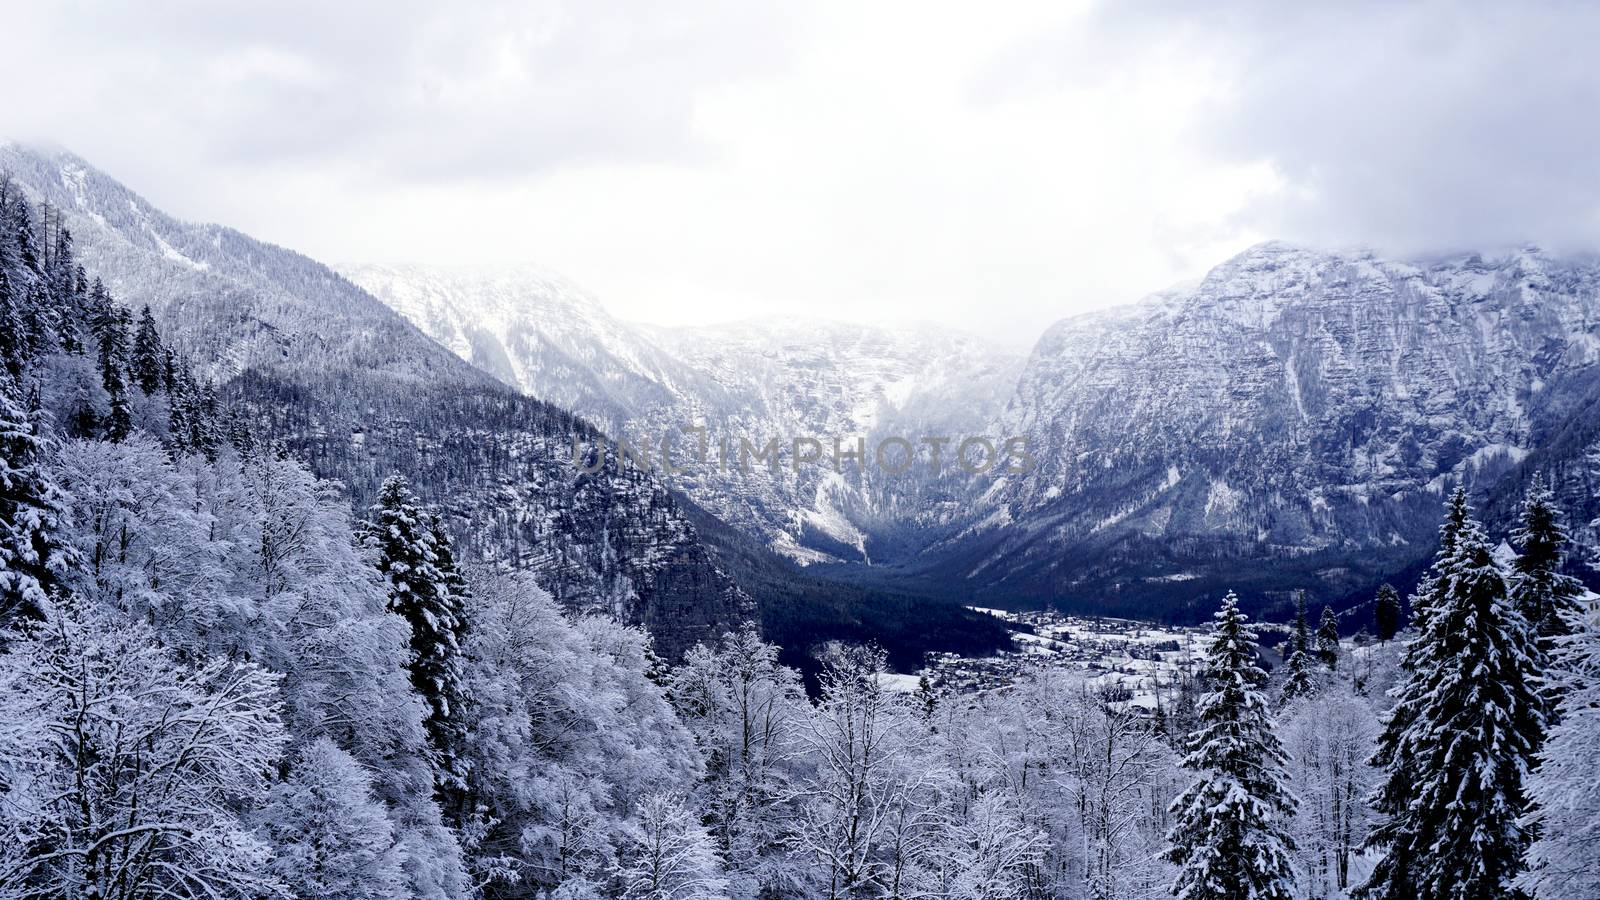 Scenery dreamscape of Hallstatt Winter snow mountain landscape valley and lake through the forest in upland valley leads to the old salt mine of Hallstatt, Austria by polarbearstudio